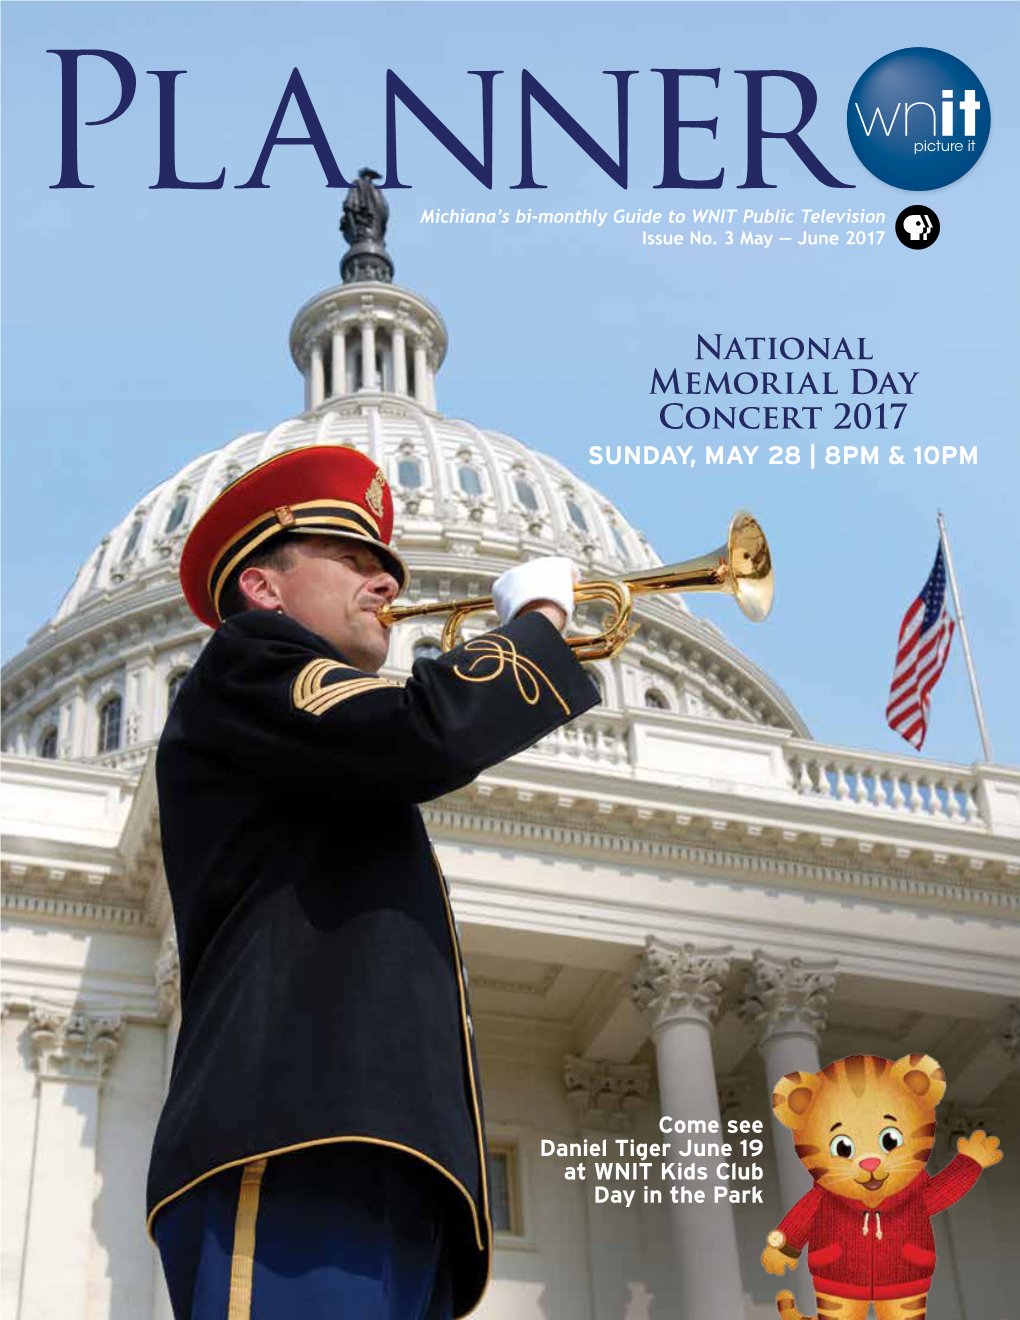 National Memorial Day Concert 2017 SUNDAY, MAY 28 | 8PM & 10PM